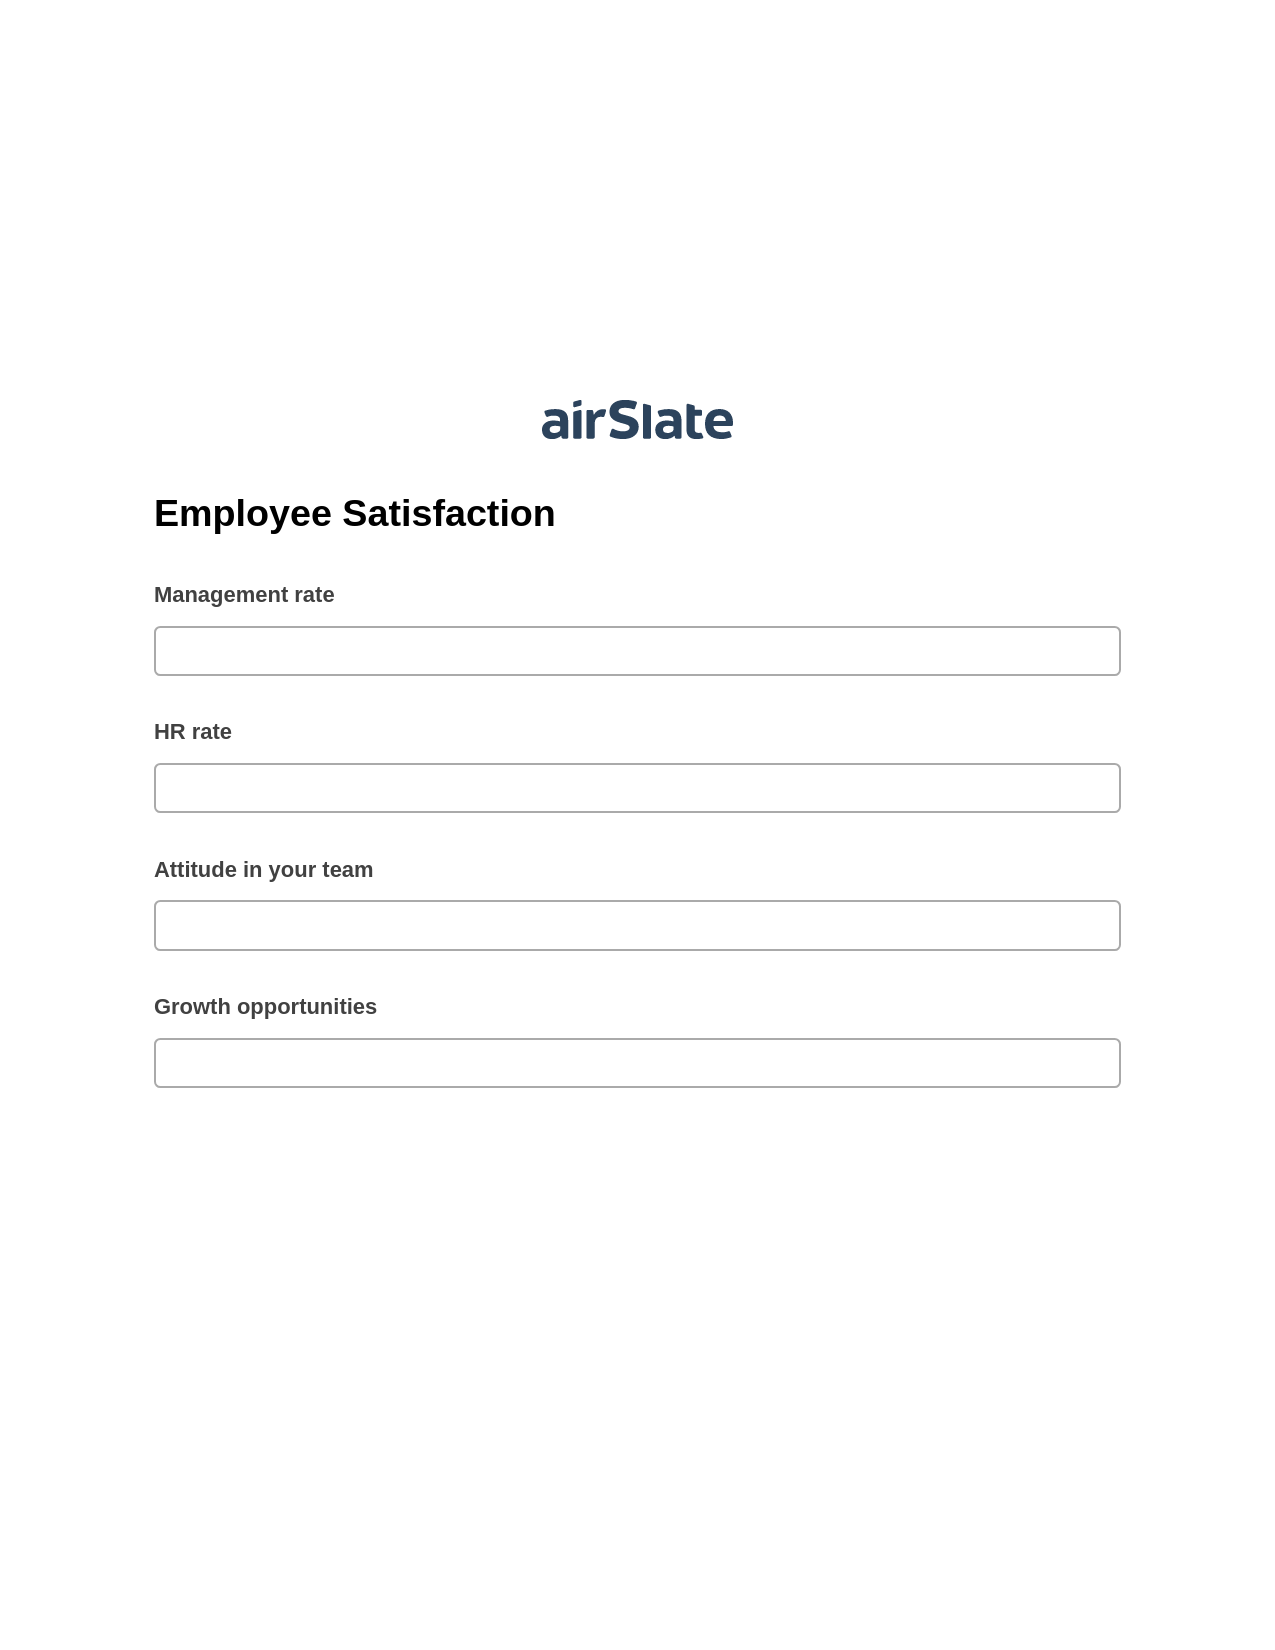 Employee Satisfaction Pre-fill from CSV File Bot, Text Message Notification Bot, Export to Google Sheet Bot